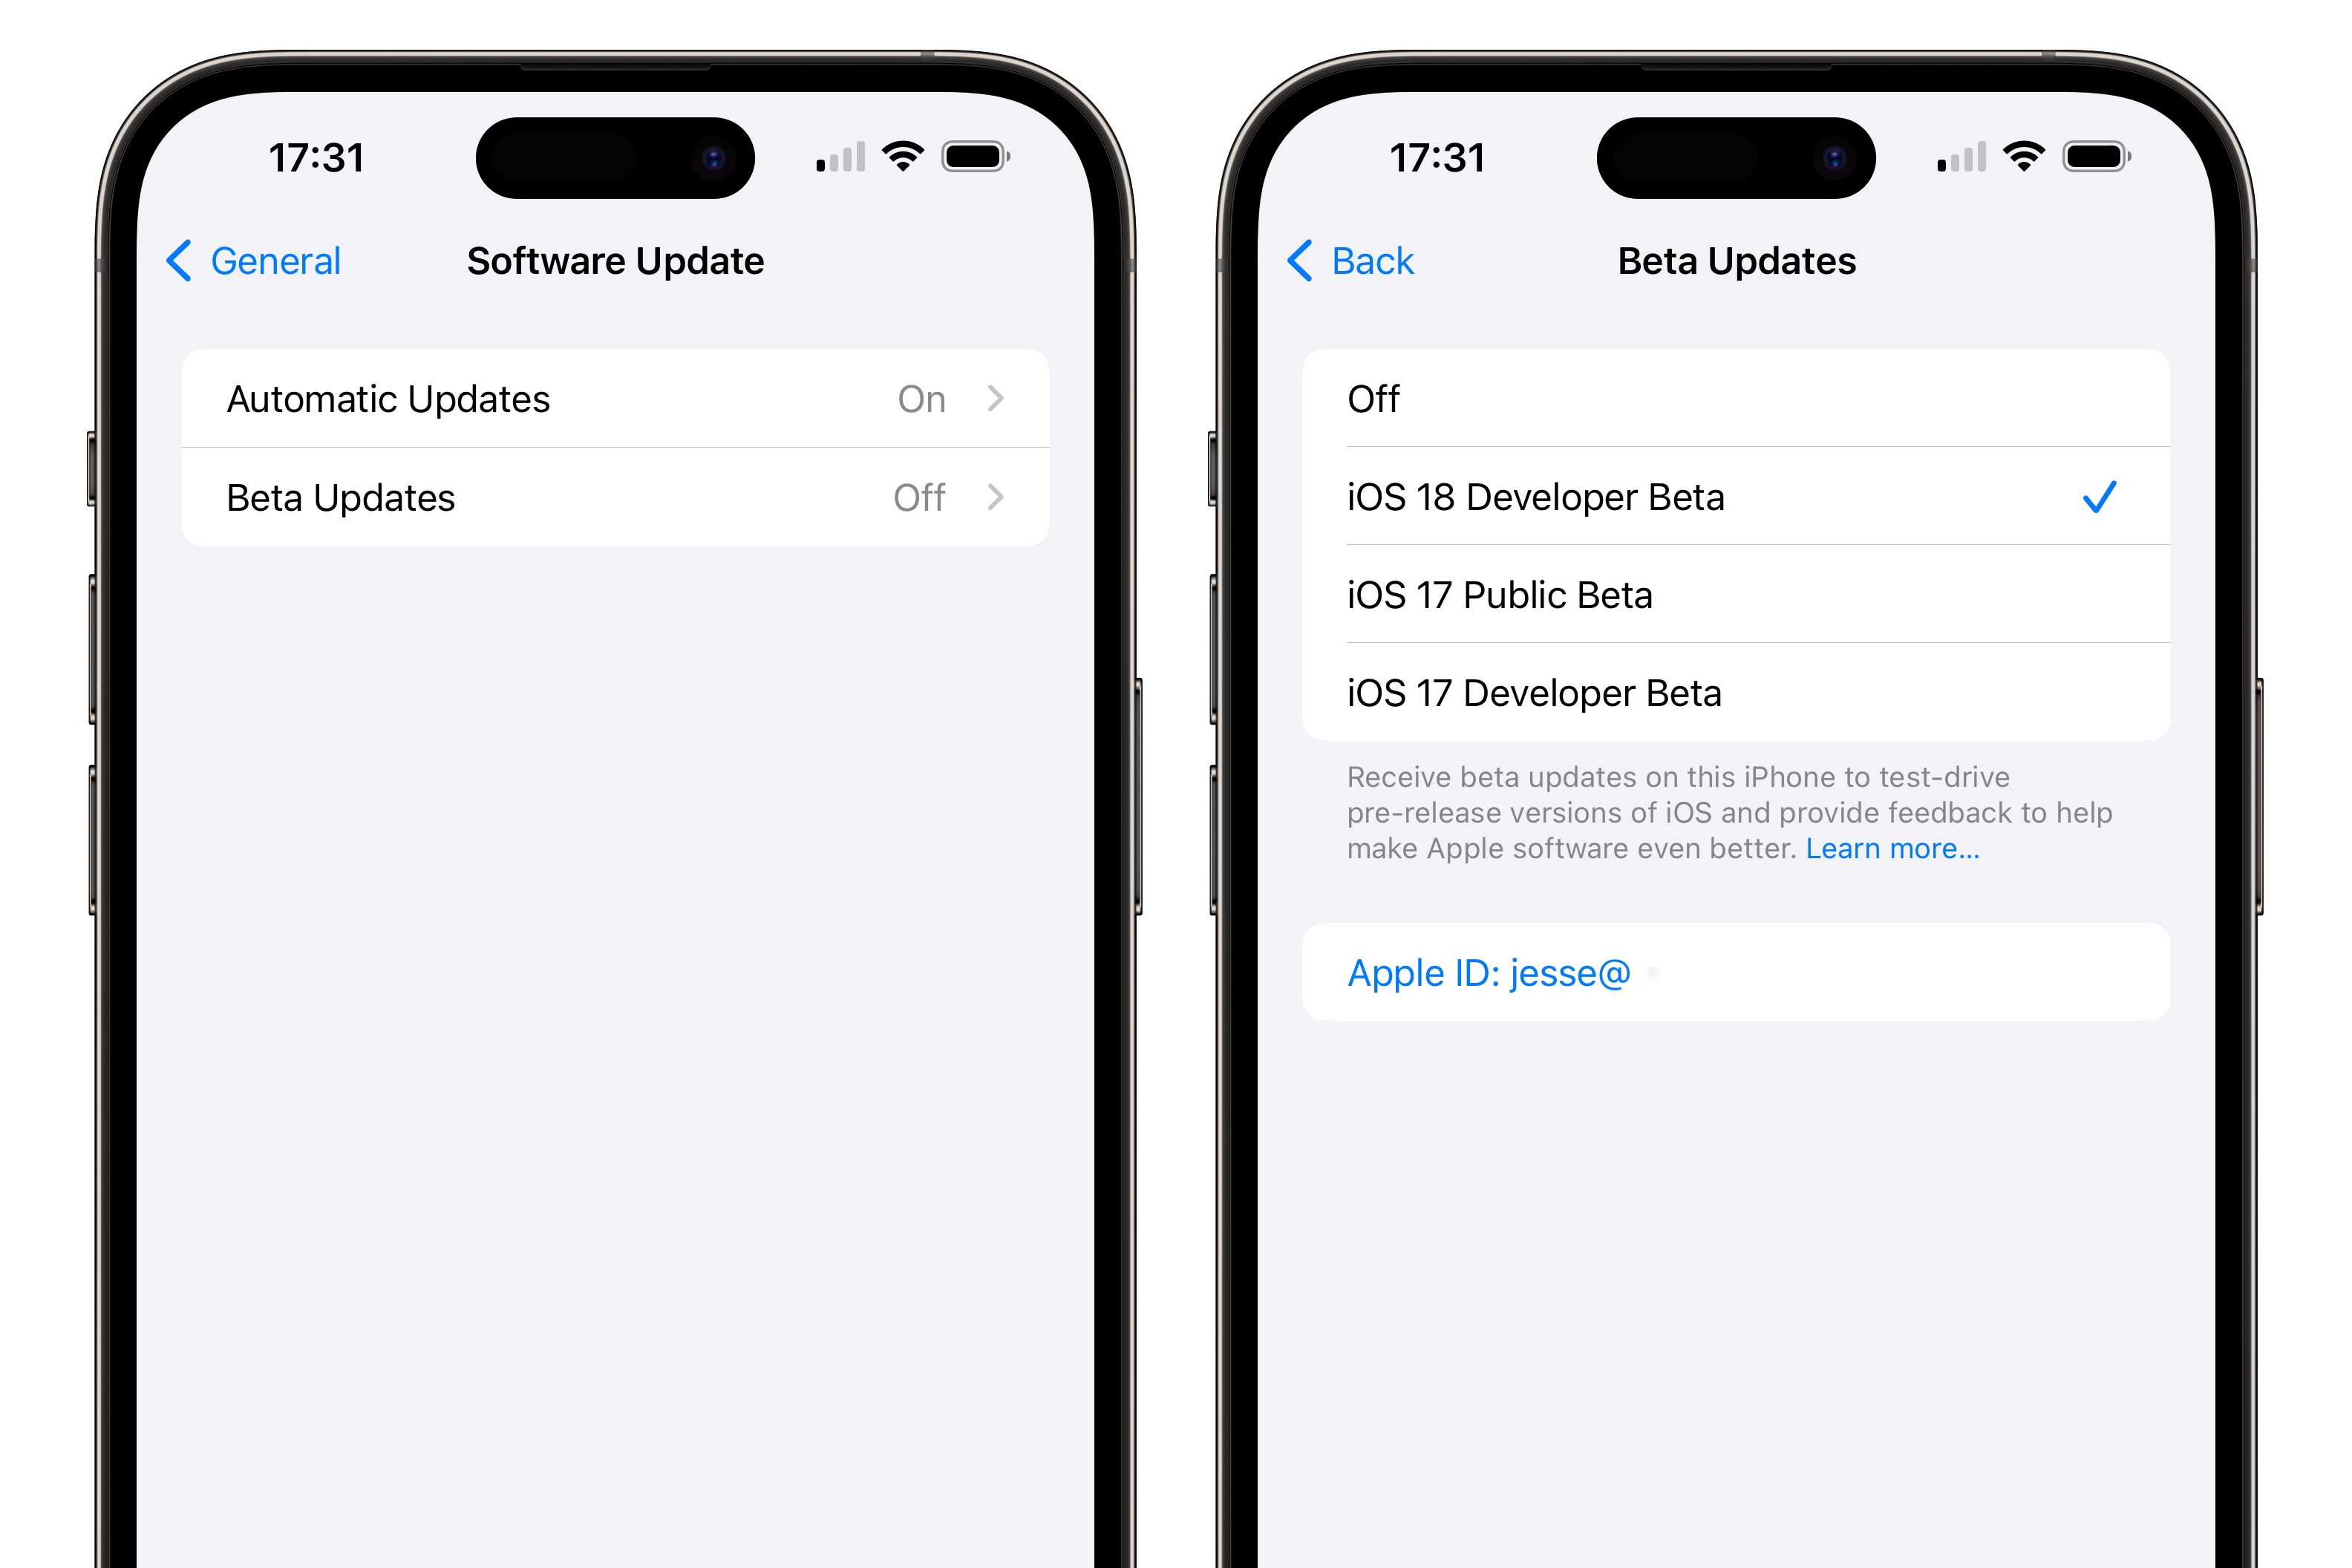 iPhones showing settings to enable iOS 18 Developer Beta updates.